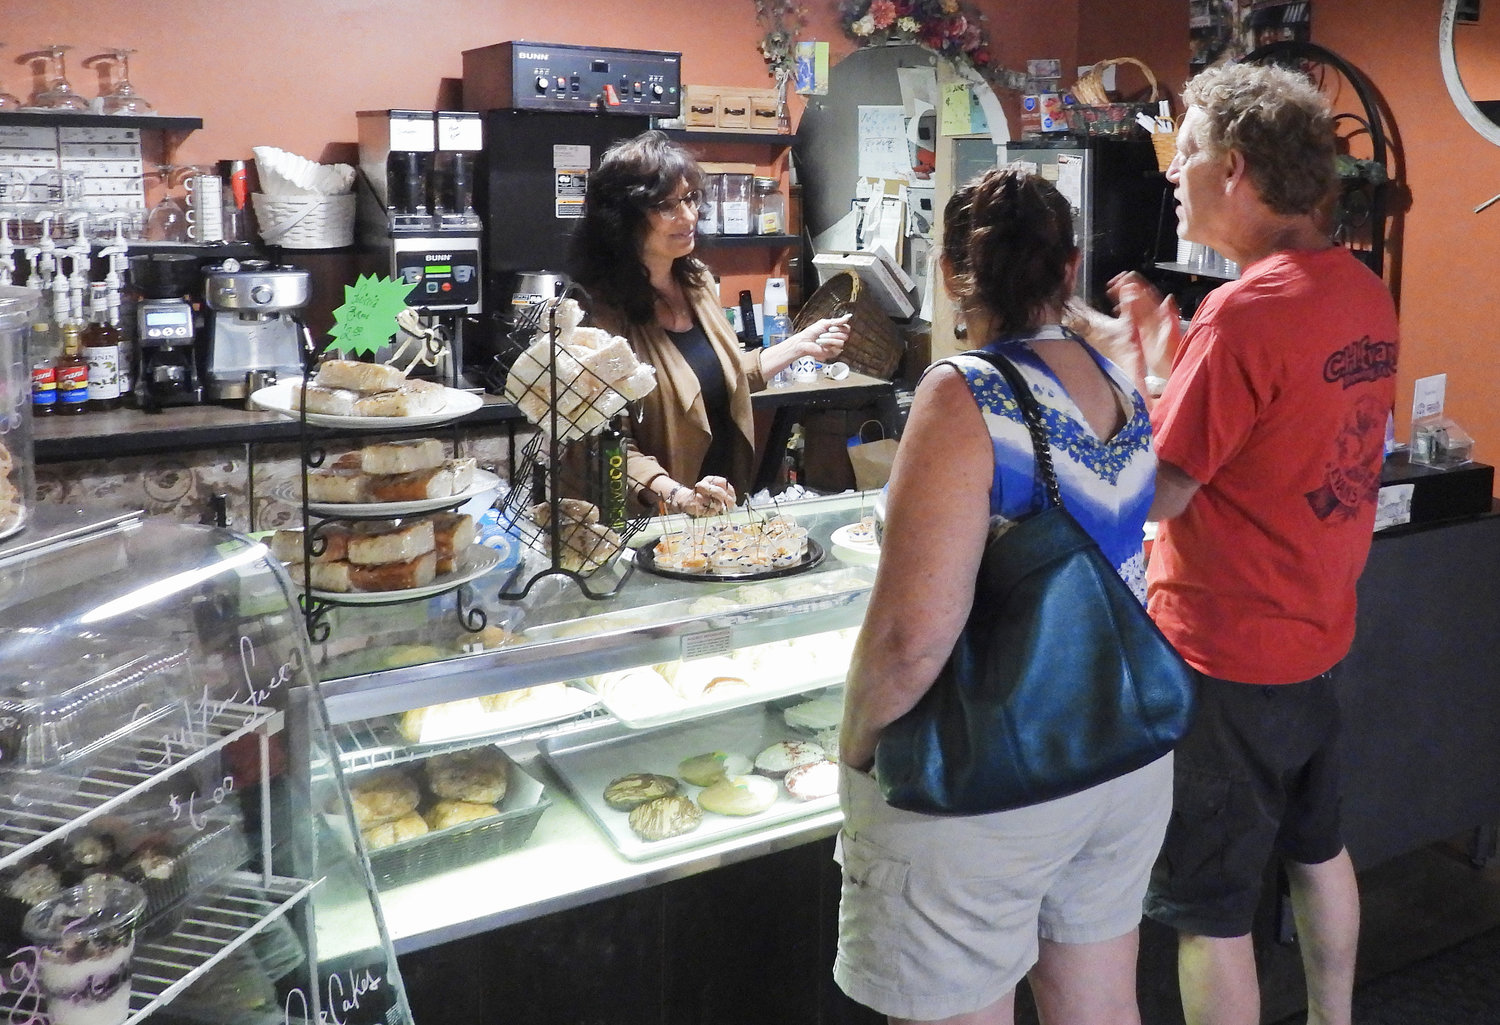 Bella Vita Cafe Owner Lori Seef talks with visitors and customers at the grand opening of the Cafe's bakery addition.